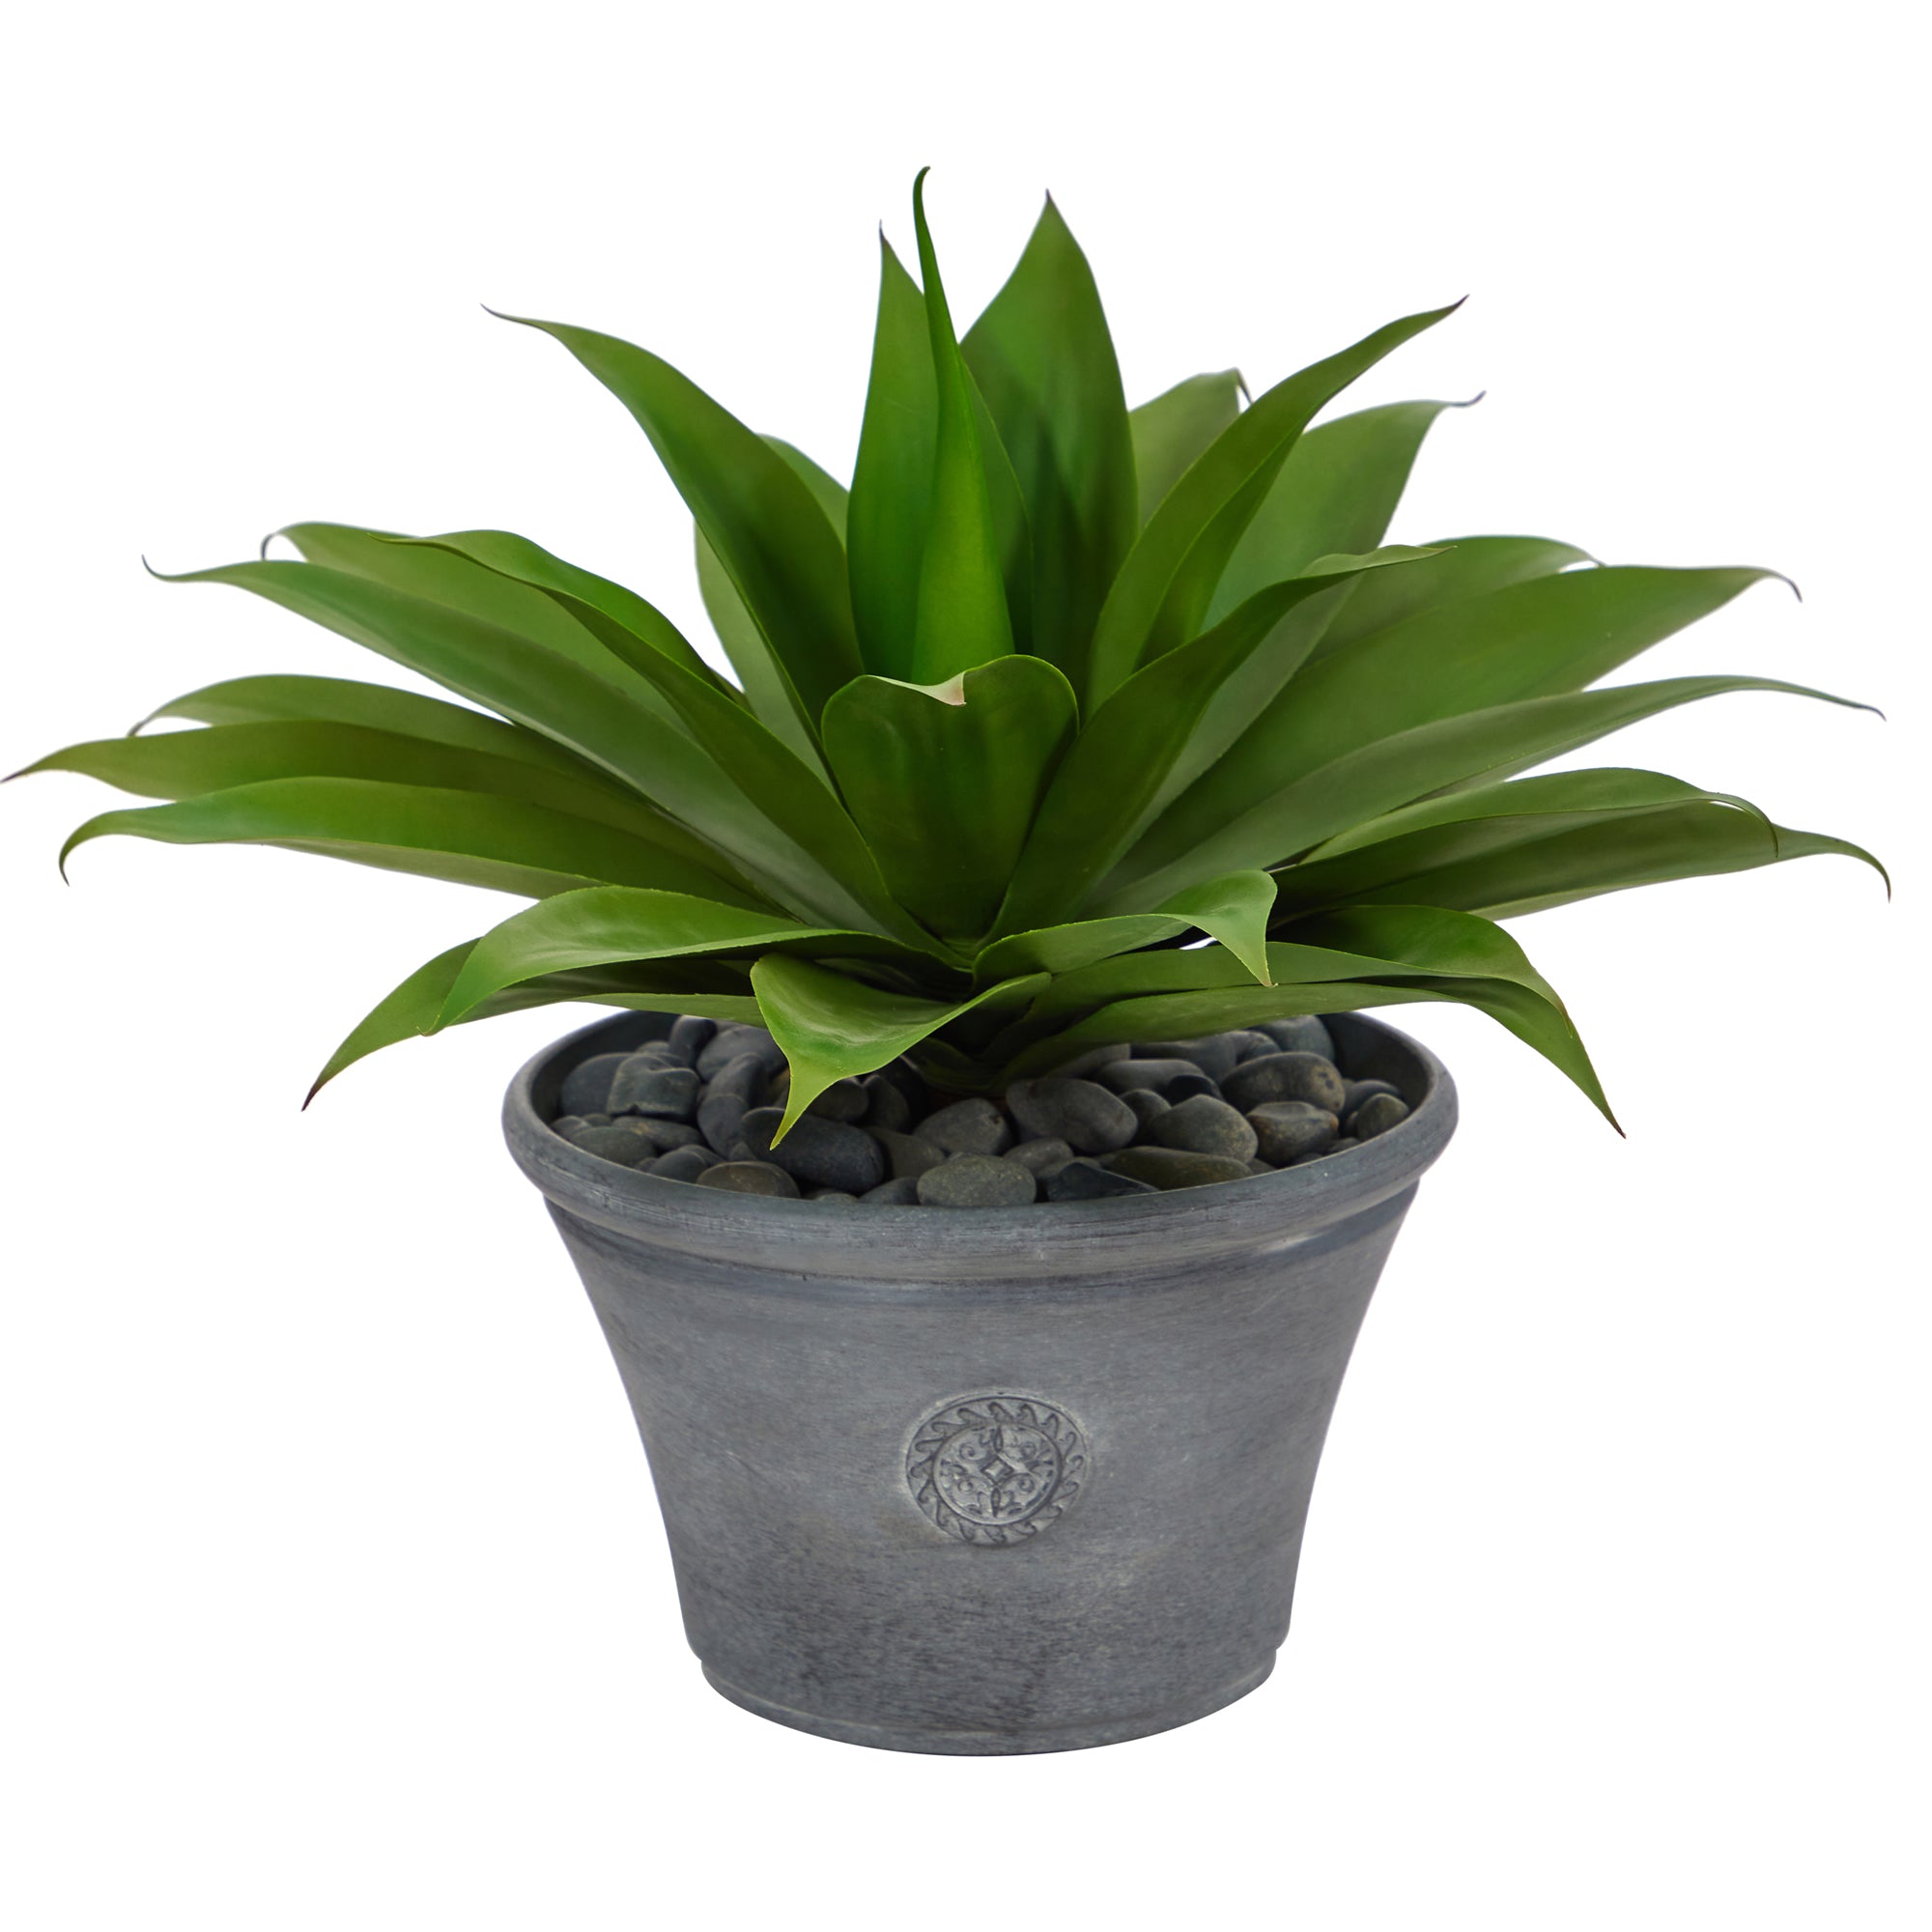 22” Agave Succulent Artificial Plant in Gray Planter